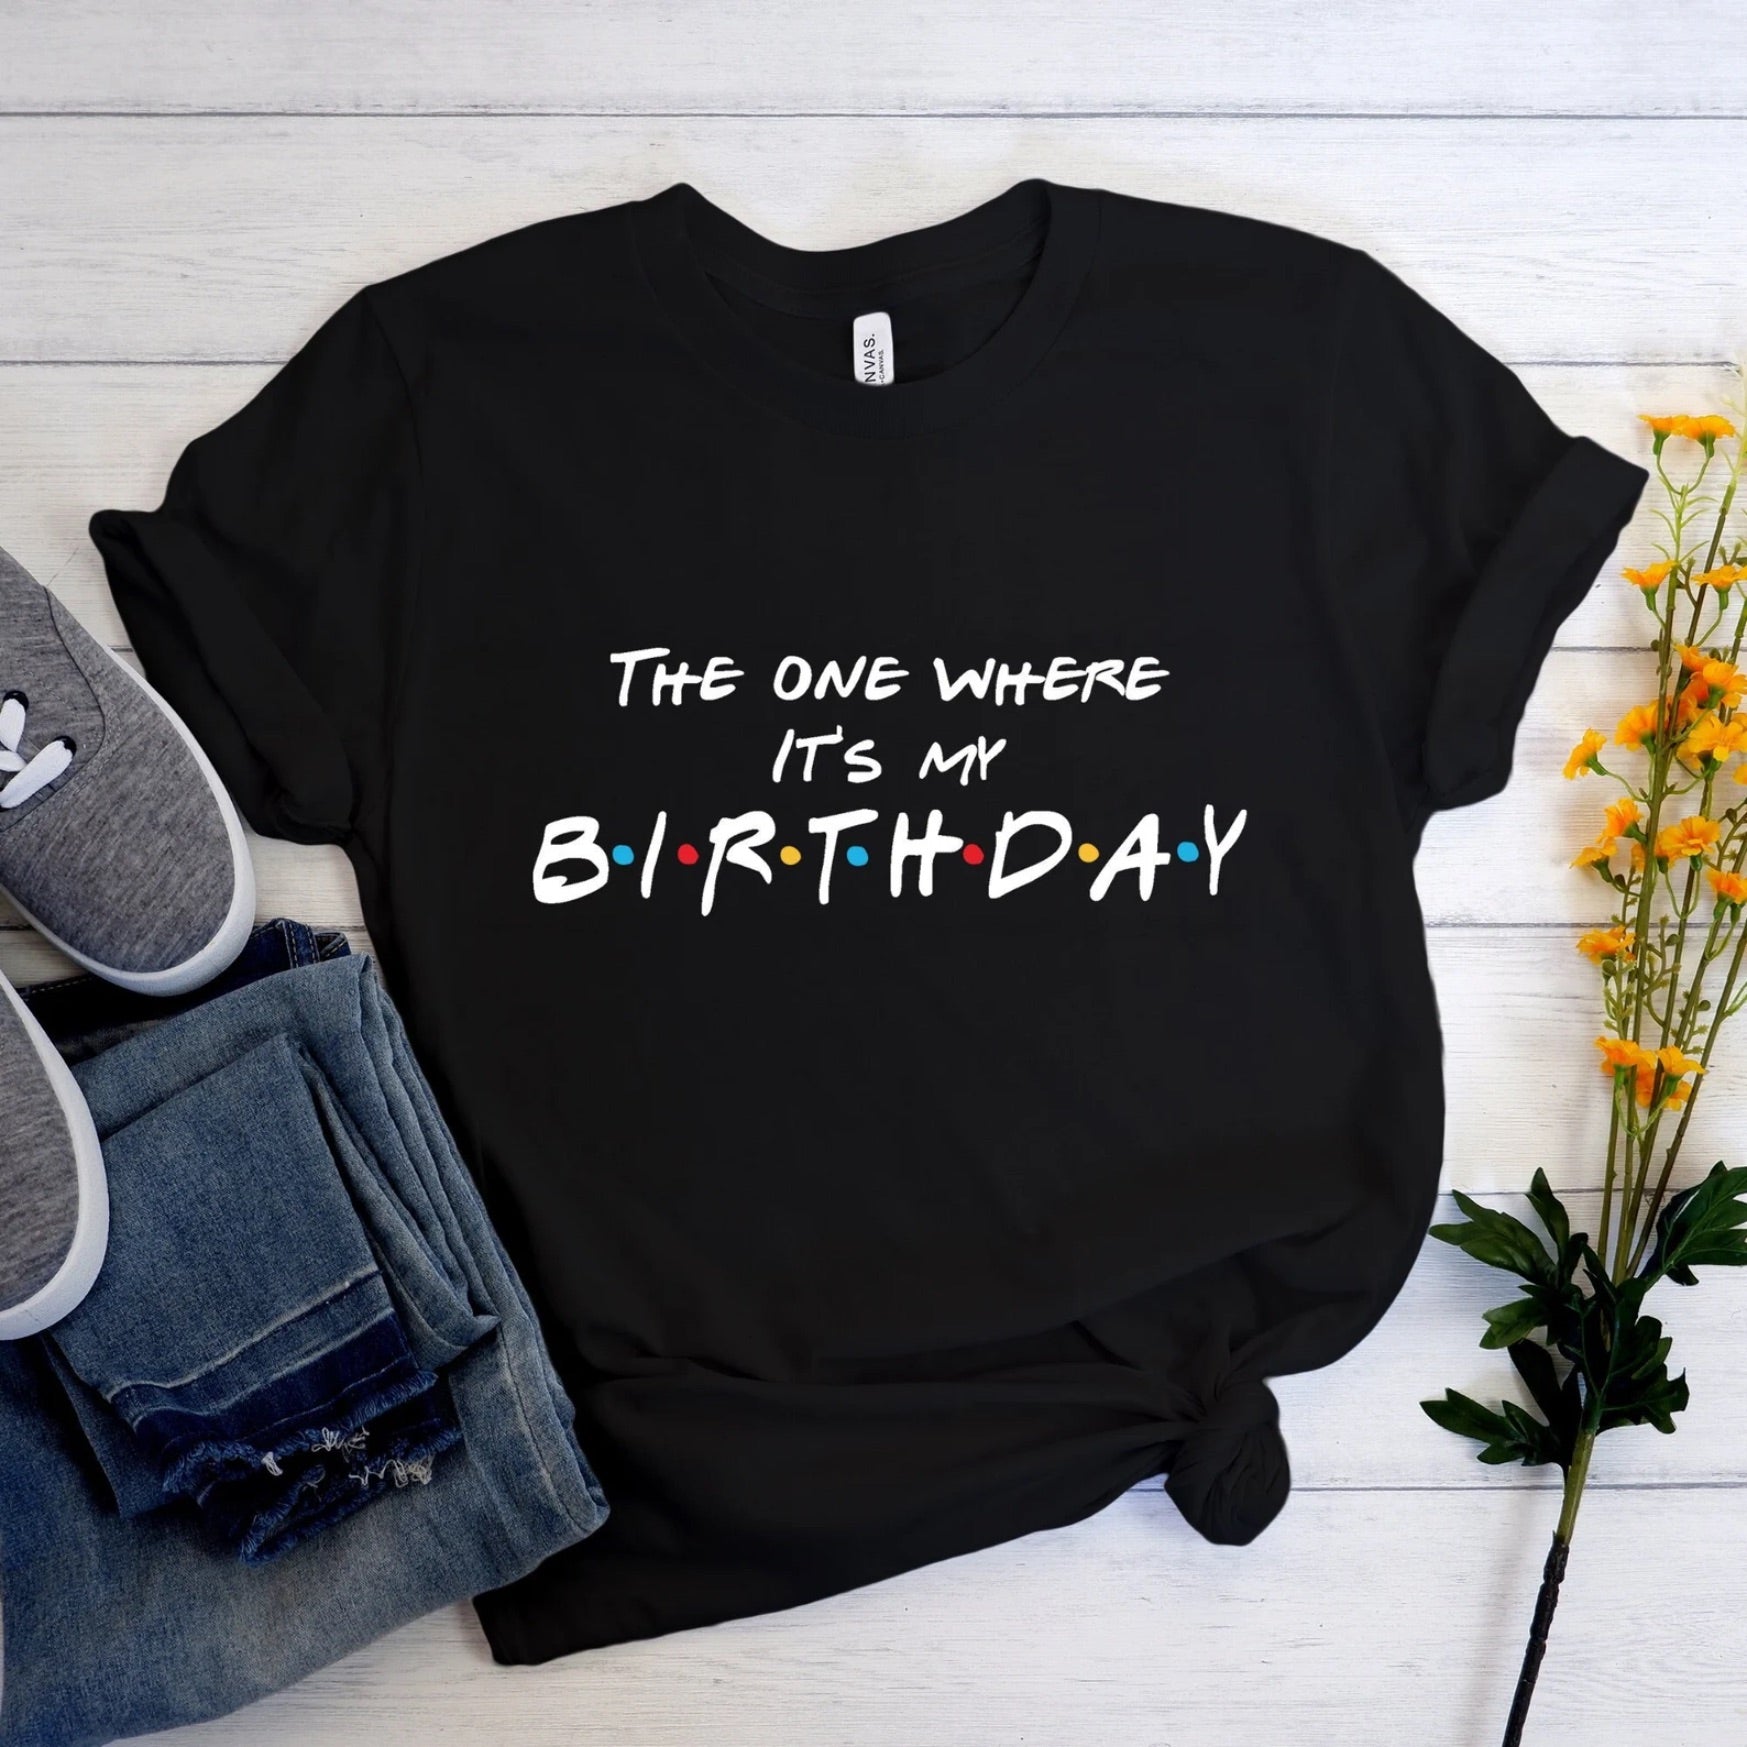 The One Where It's My Birthday T-shirt